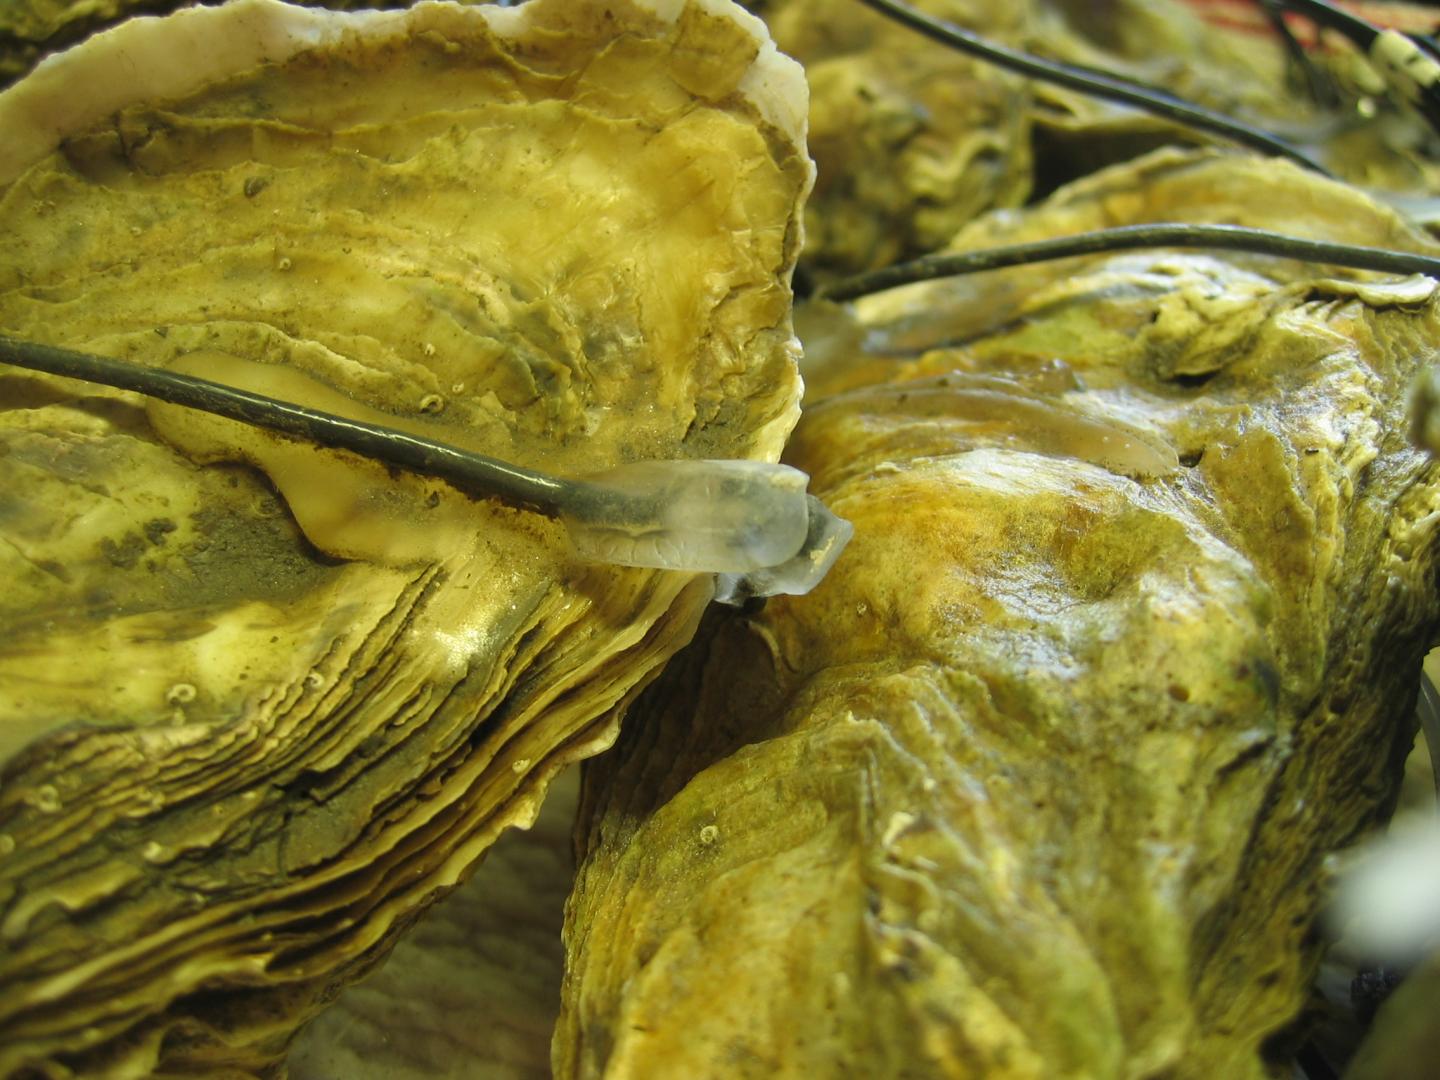 Oysters Close Their Shells in Response to Low-frequency Sounds